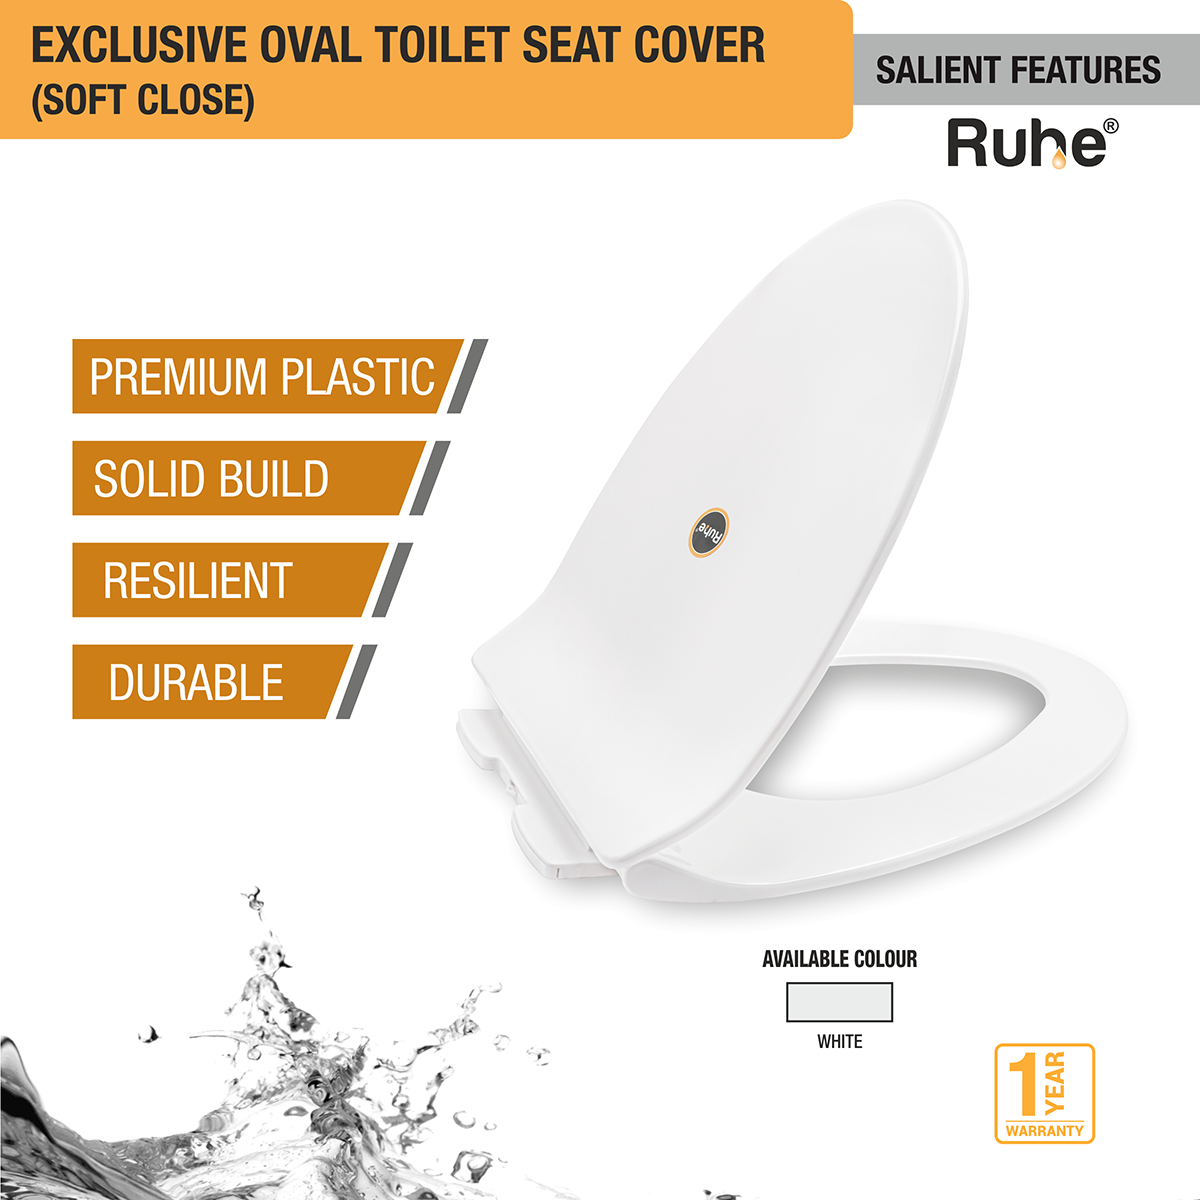 Exclusive Oval Toilet Seat Cover (Soft Close) features and benefits